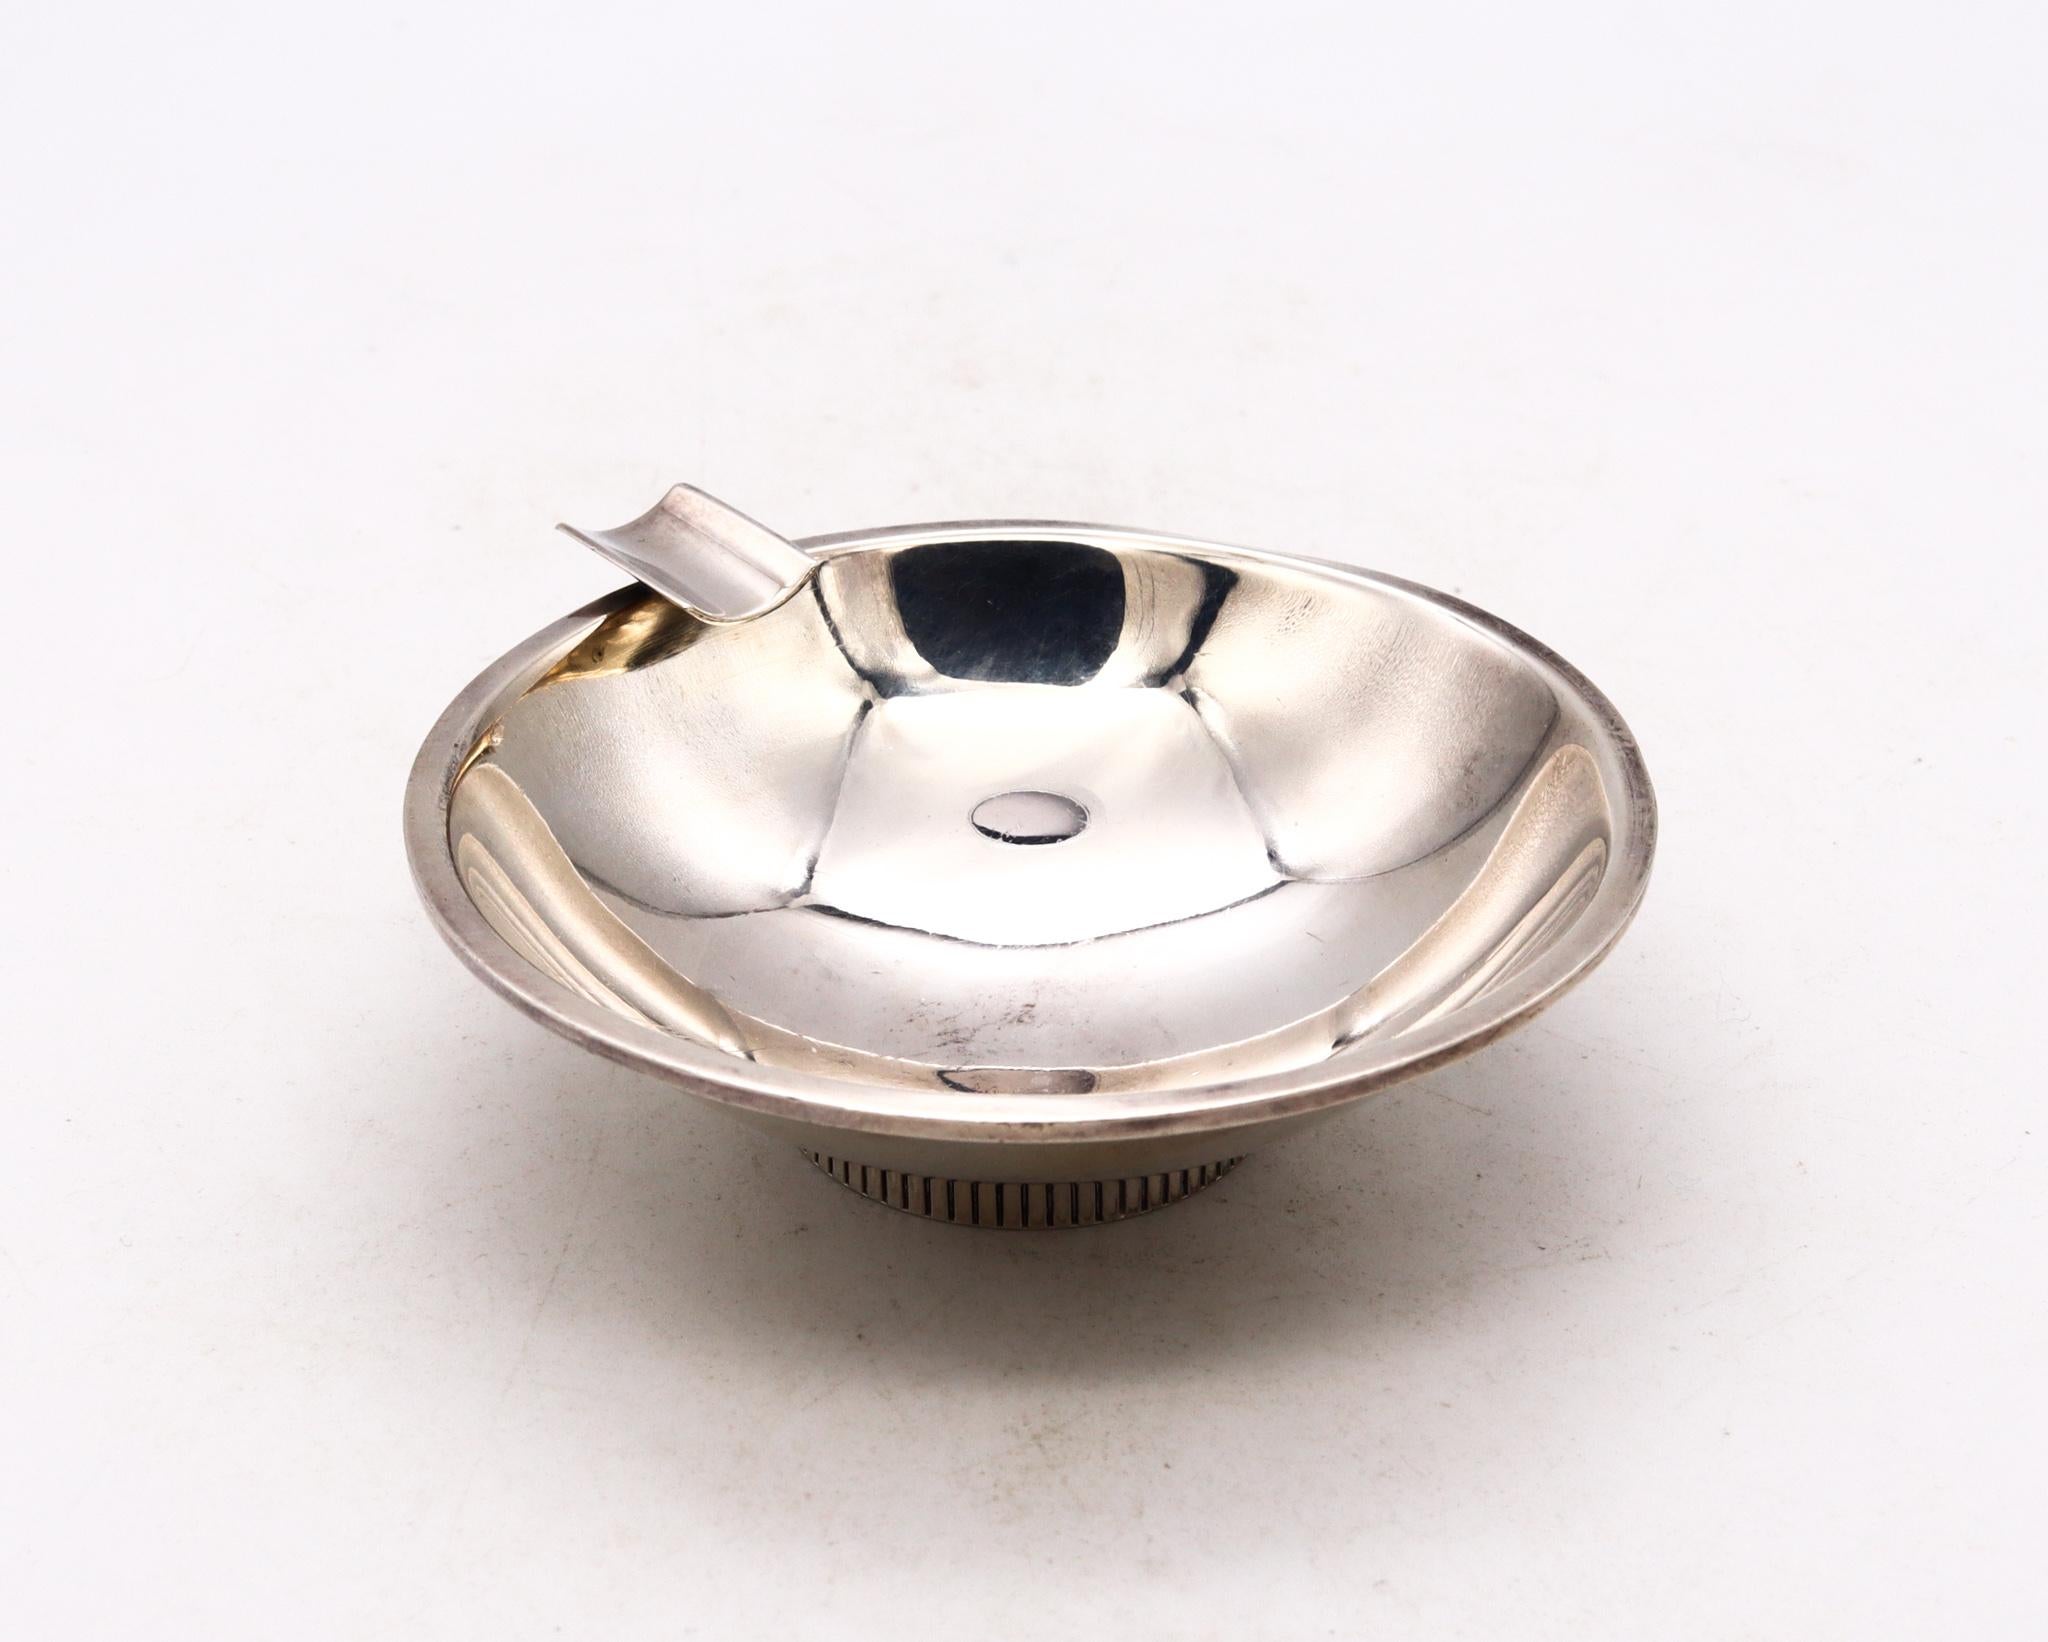 H. Nils 1970 Denmark Modernism Geometric Round Ashtray Cup .925 Sterling Silver In Excellent Condition For Sale In Miami, FL